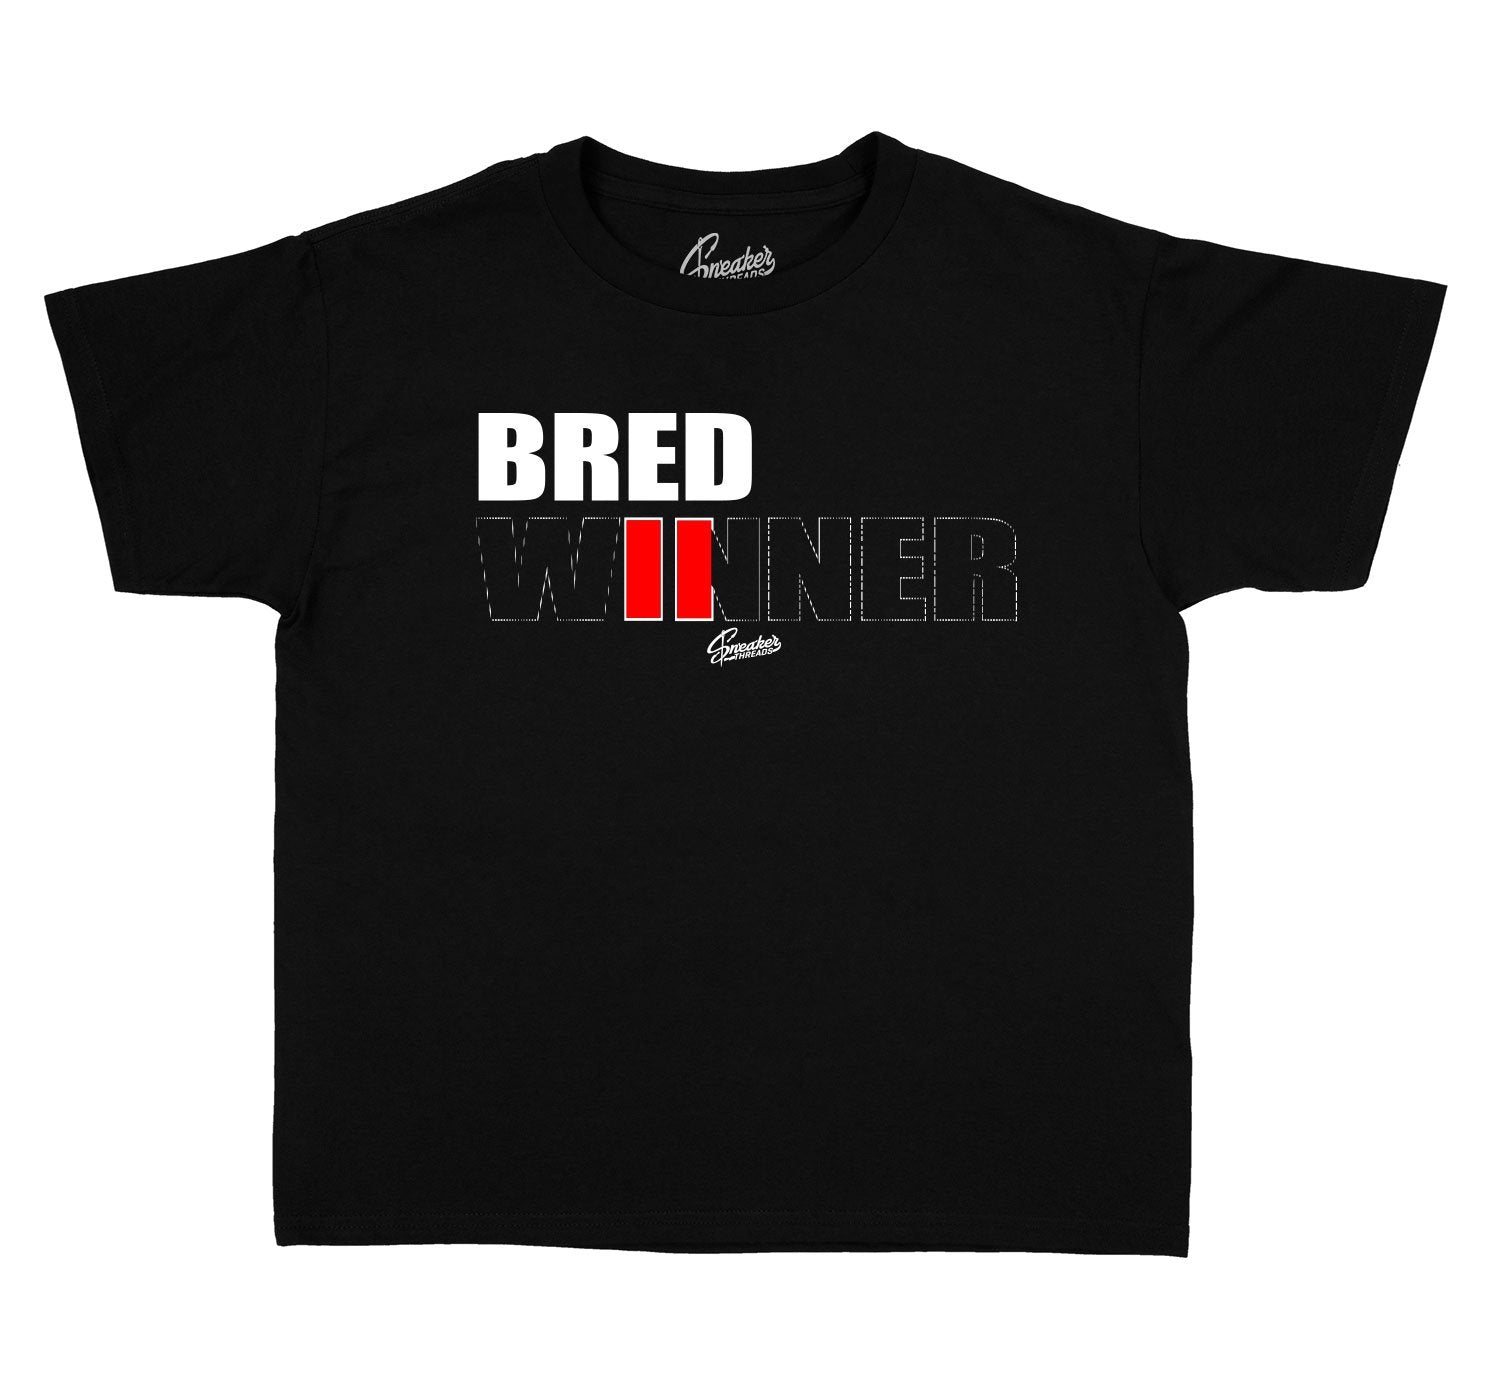 kids tees created to match the Jordan bred 11 shoes